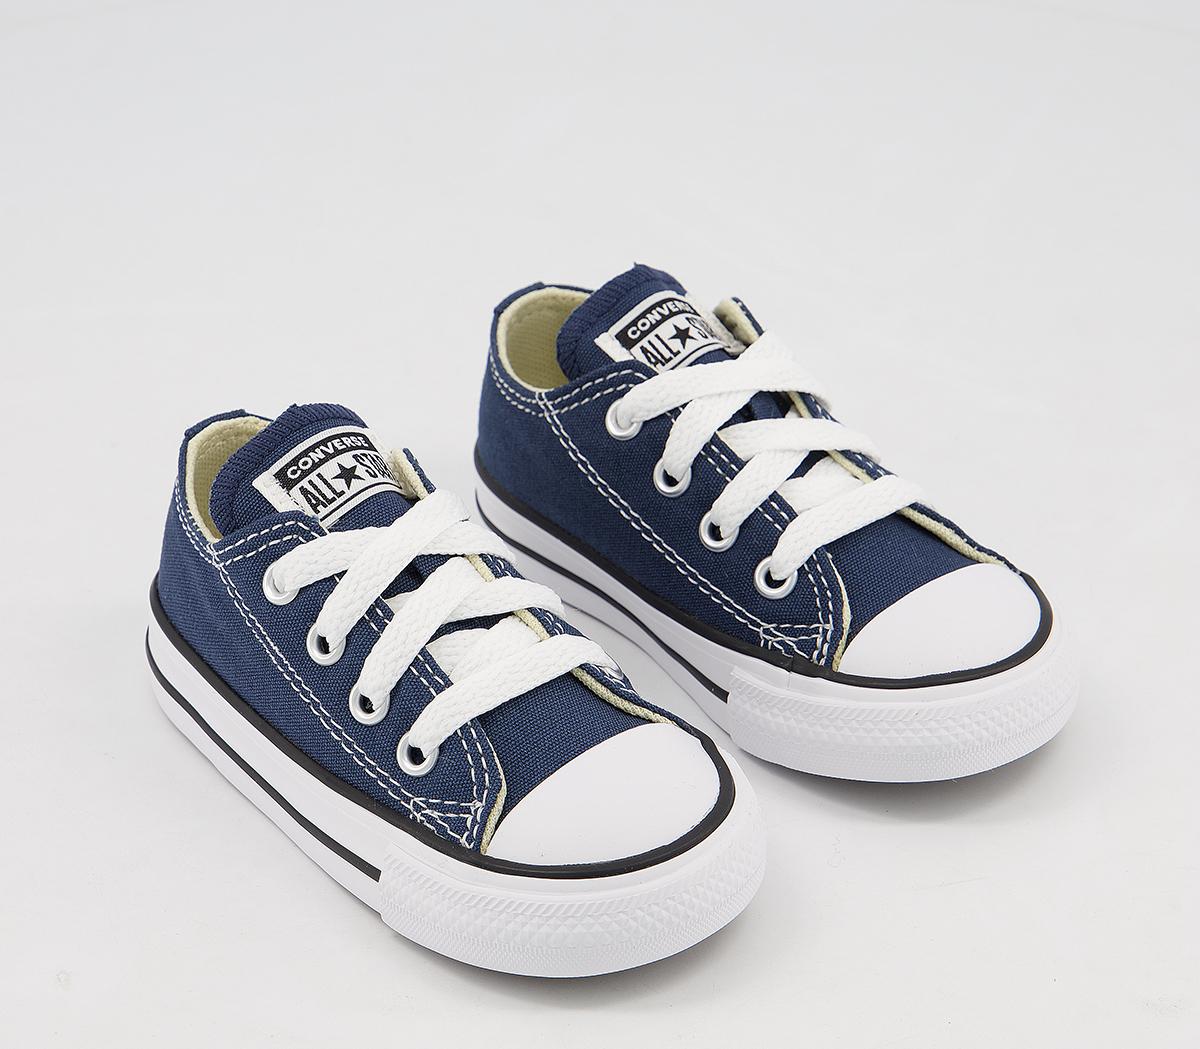 Kids Converse Baby Boys All Star Low Shoes In Navy Blue And White, 8 Infant